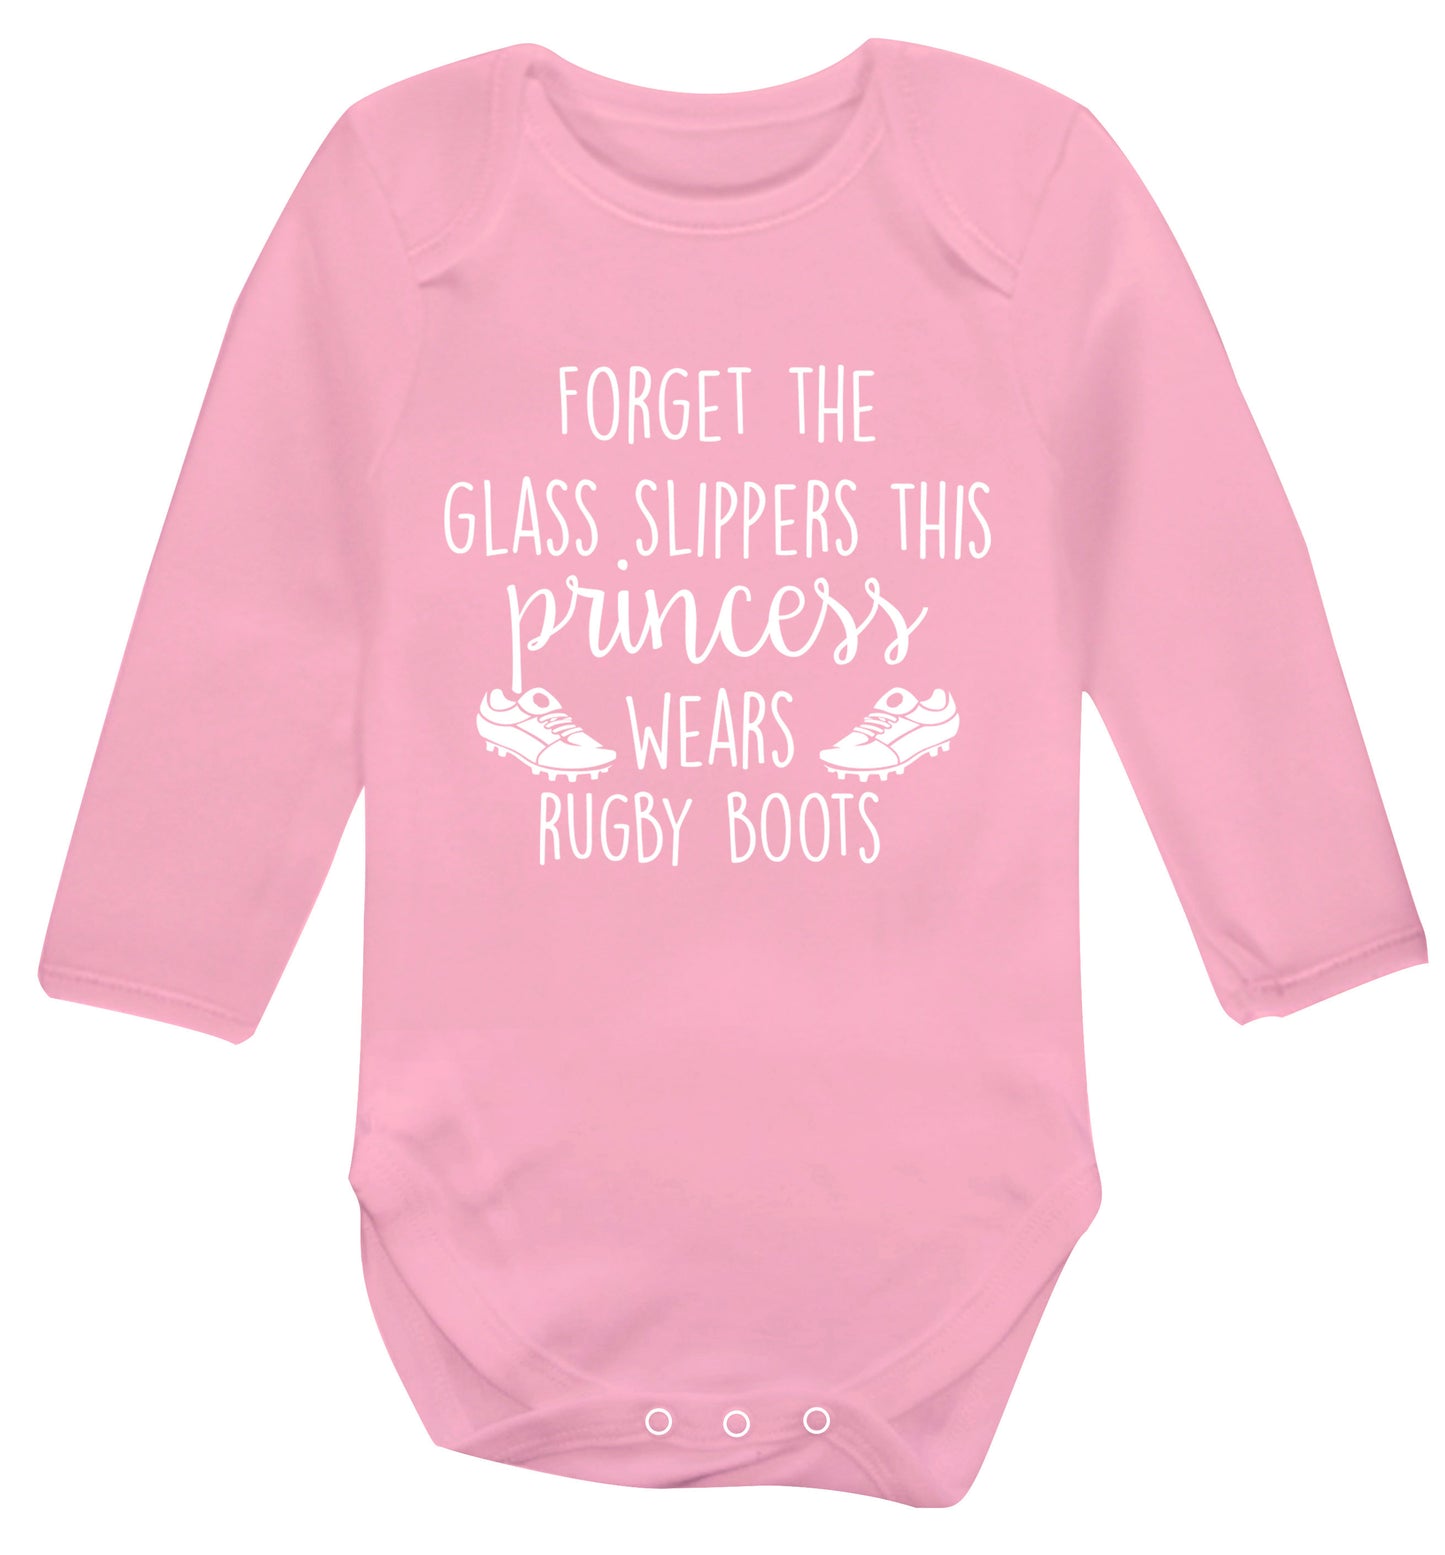 Forget the glass slippers this princess wears rugby boots Baby Vest long sleeved pale pink 6-12 months